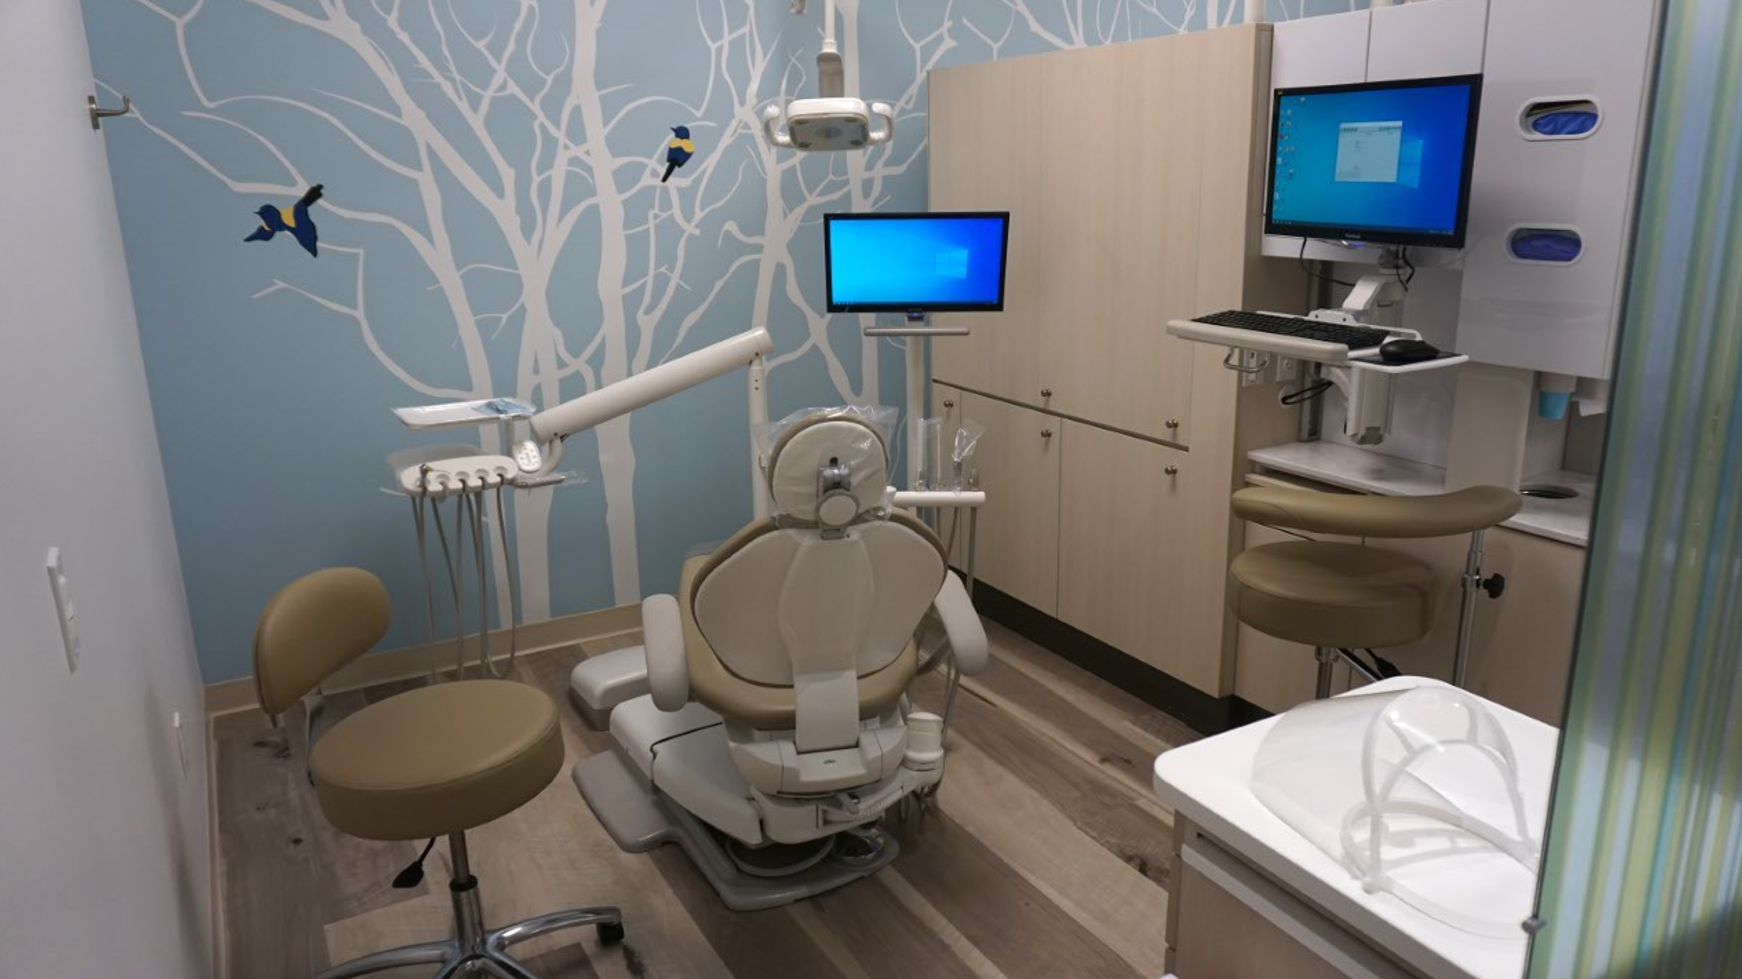 Aspire Dental & Implant treatment rooms are designed to be bright and comfortable. Whether you have a toothache, need dental implants, or routine cleanings, we've got you covered. Book your first dental appointment with our office in San Juan Capistrano today!